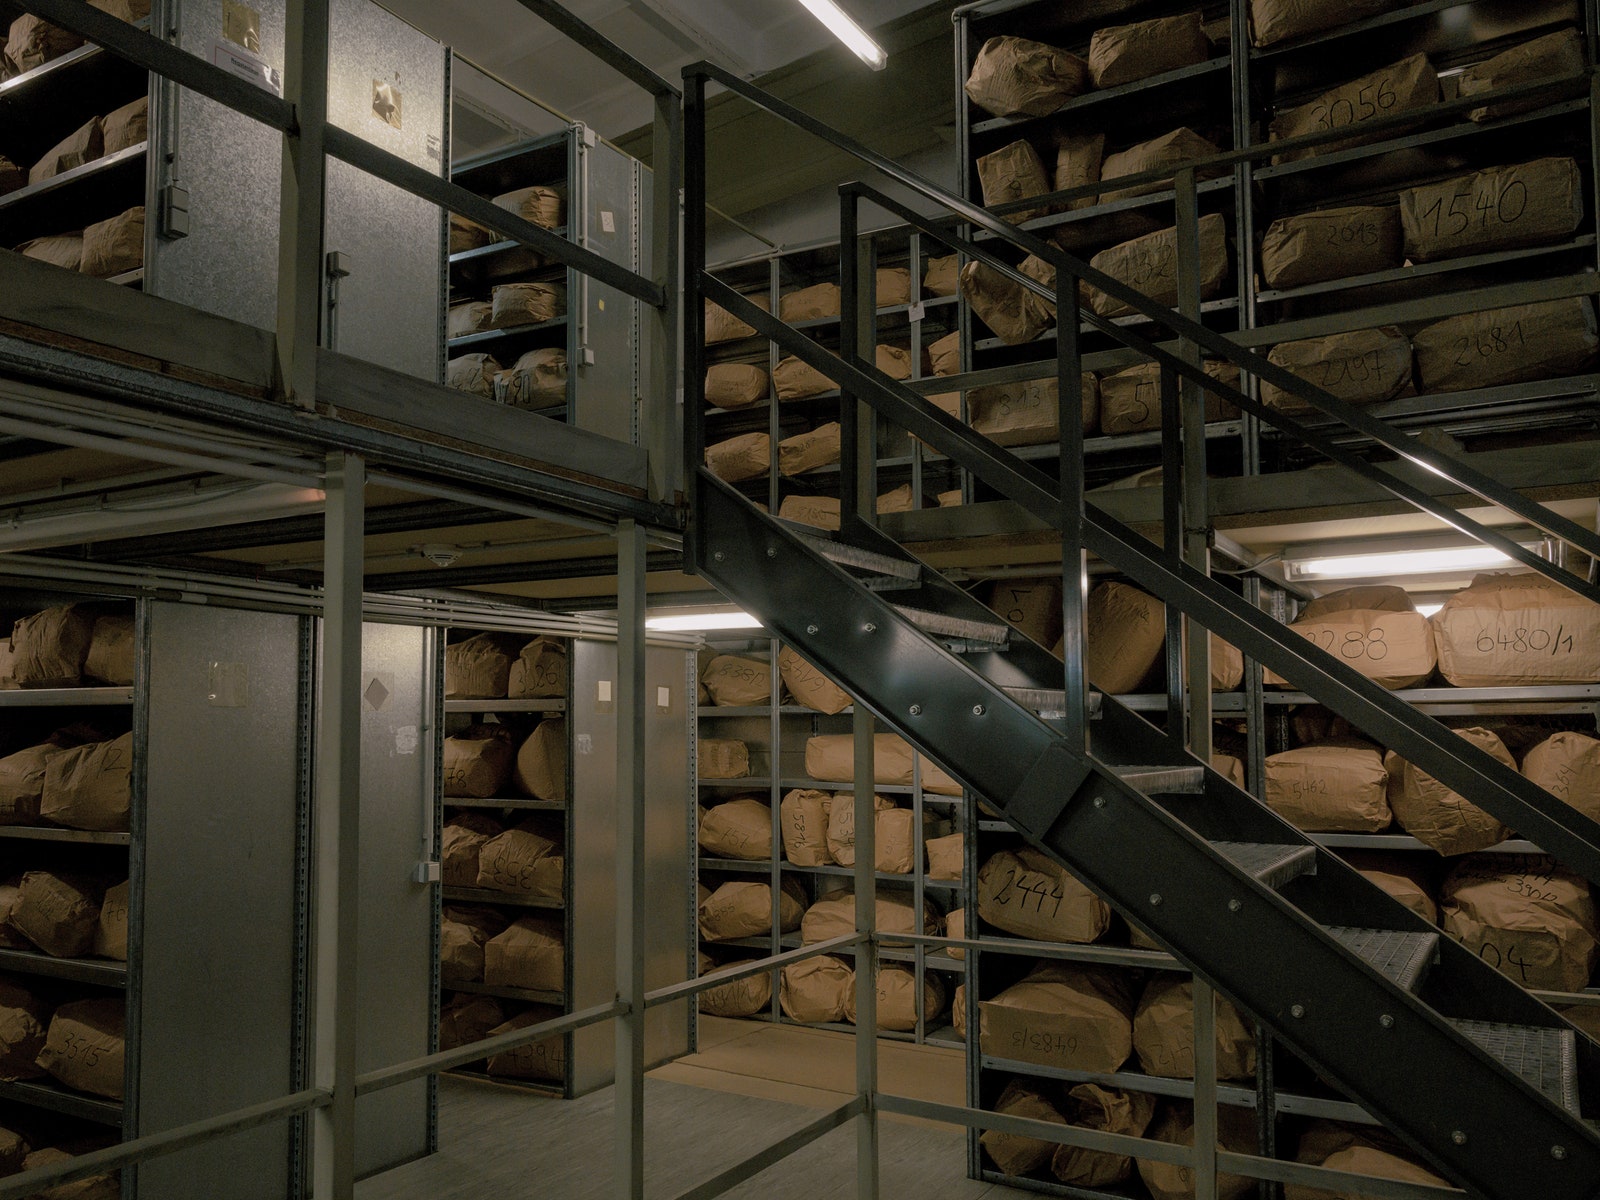 Piecing Together the Secrets of the Stasi